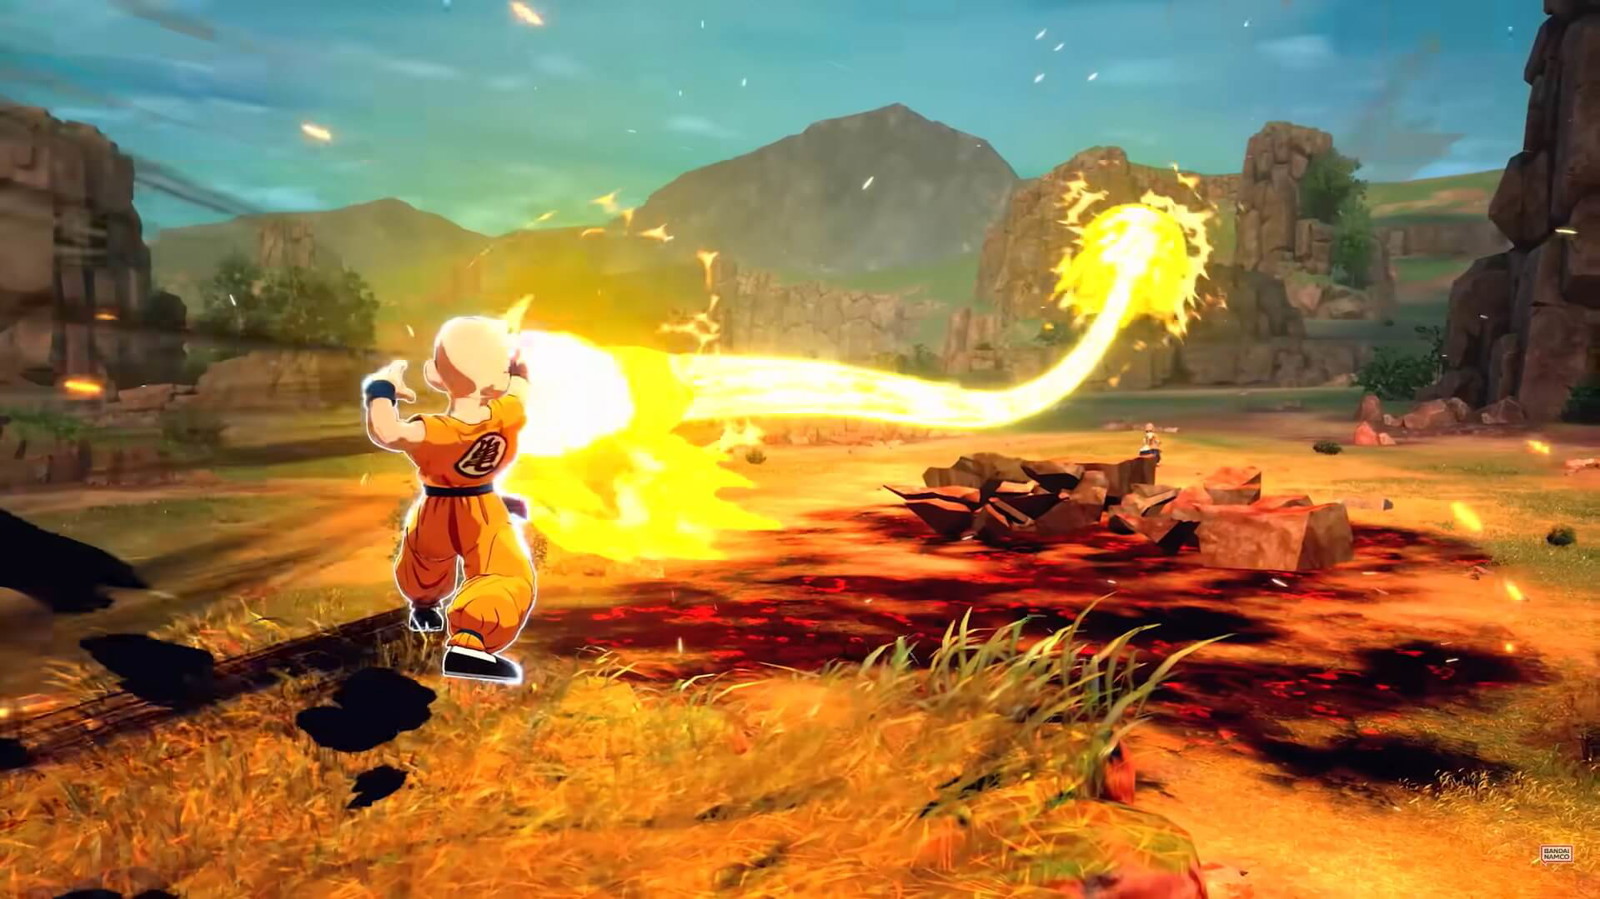 Krillin is using an energy attack against Master Roshi in Dragon Ball: Sparking Zero. Credits: Bandai Namco